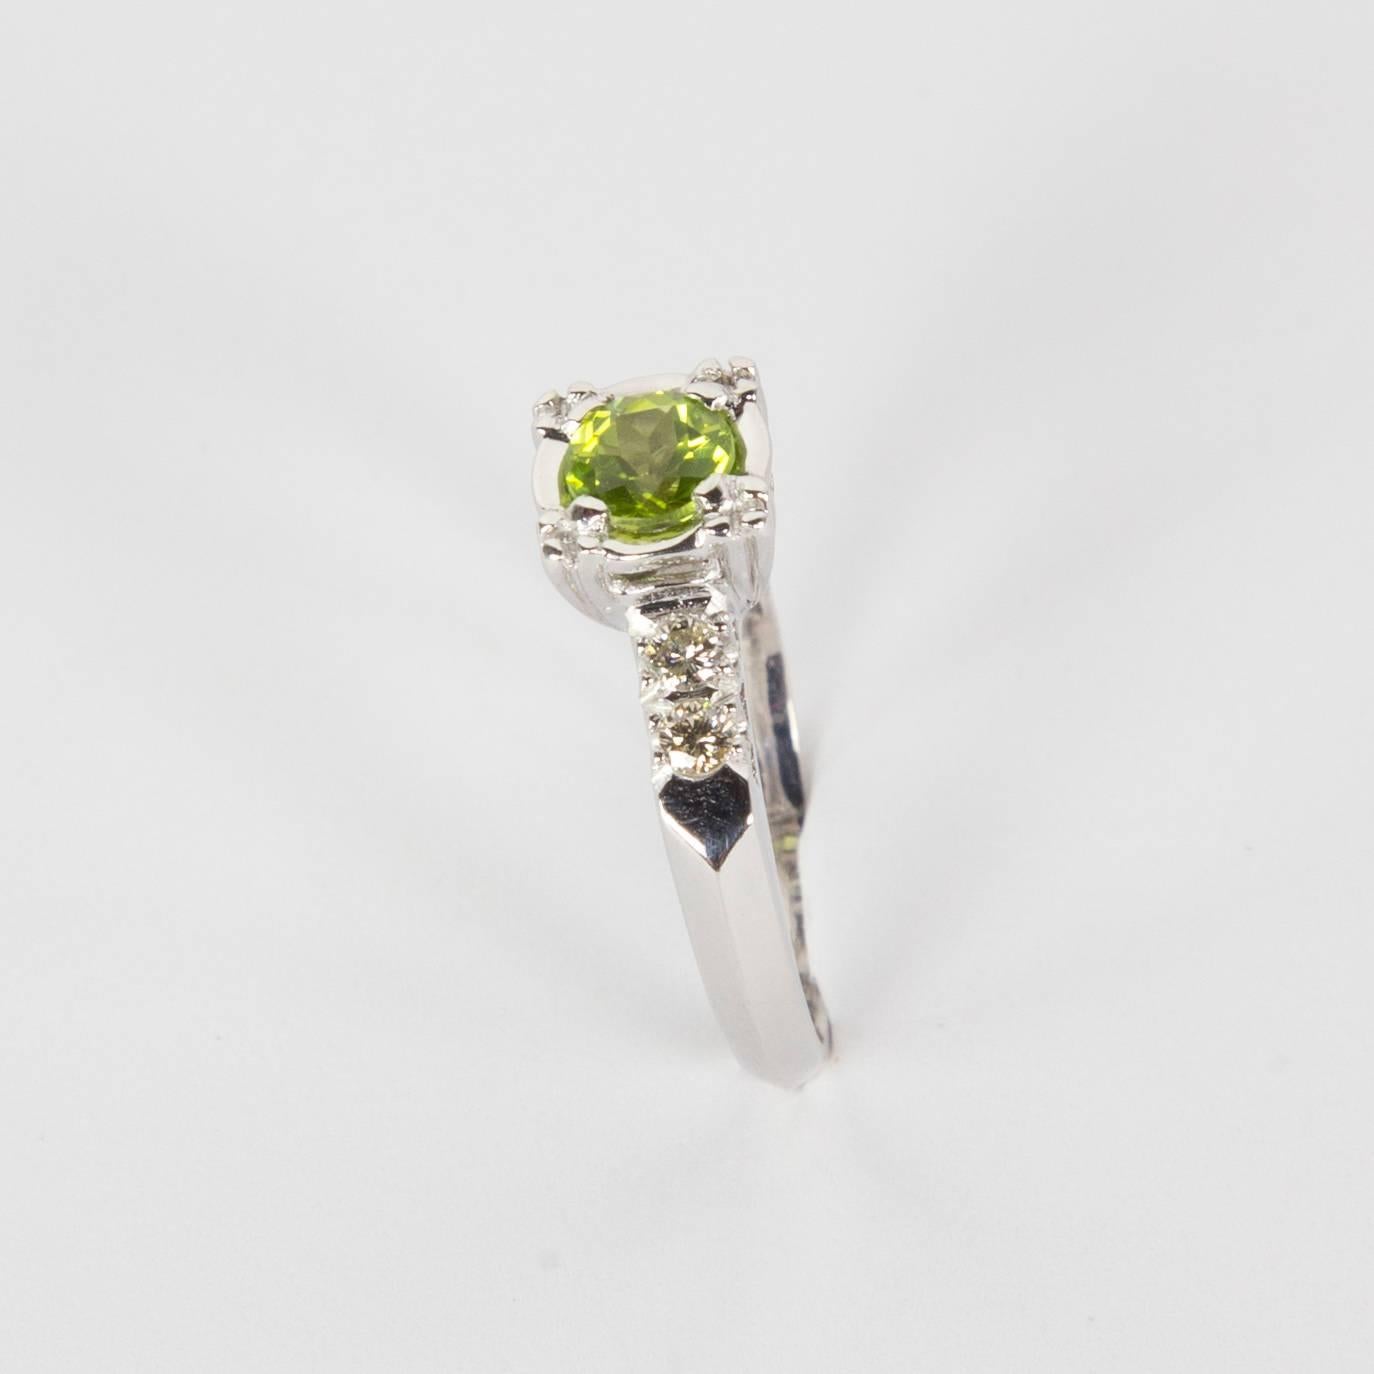 Beautiful Solitaire Engagement Ring centering a Green Tourmaline, approx. 0.45 carat; enhanced with 2 Diamonds on each shoulder of Platinum mounting. Ring size: 5.5; Complimentary ring resizing available. A Special and Timeless Engagement Ring! 
